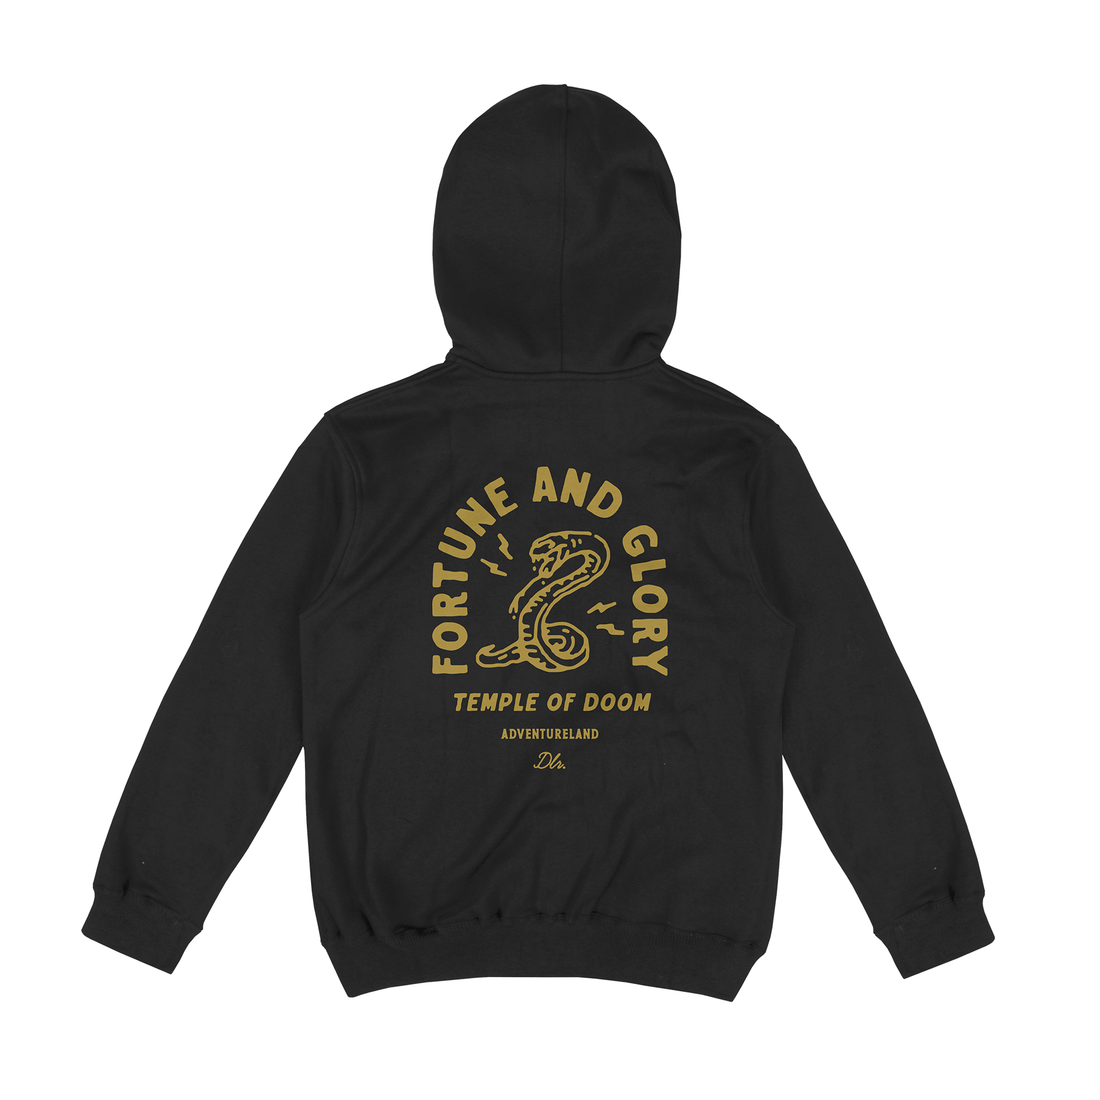 Fortune And Glory Black Zip Up Hoodie